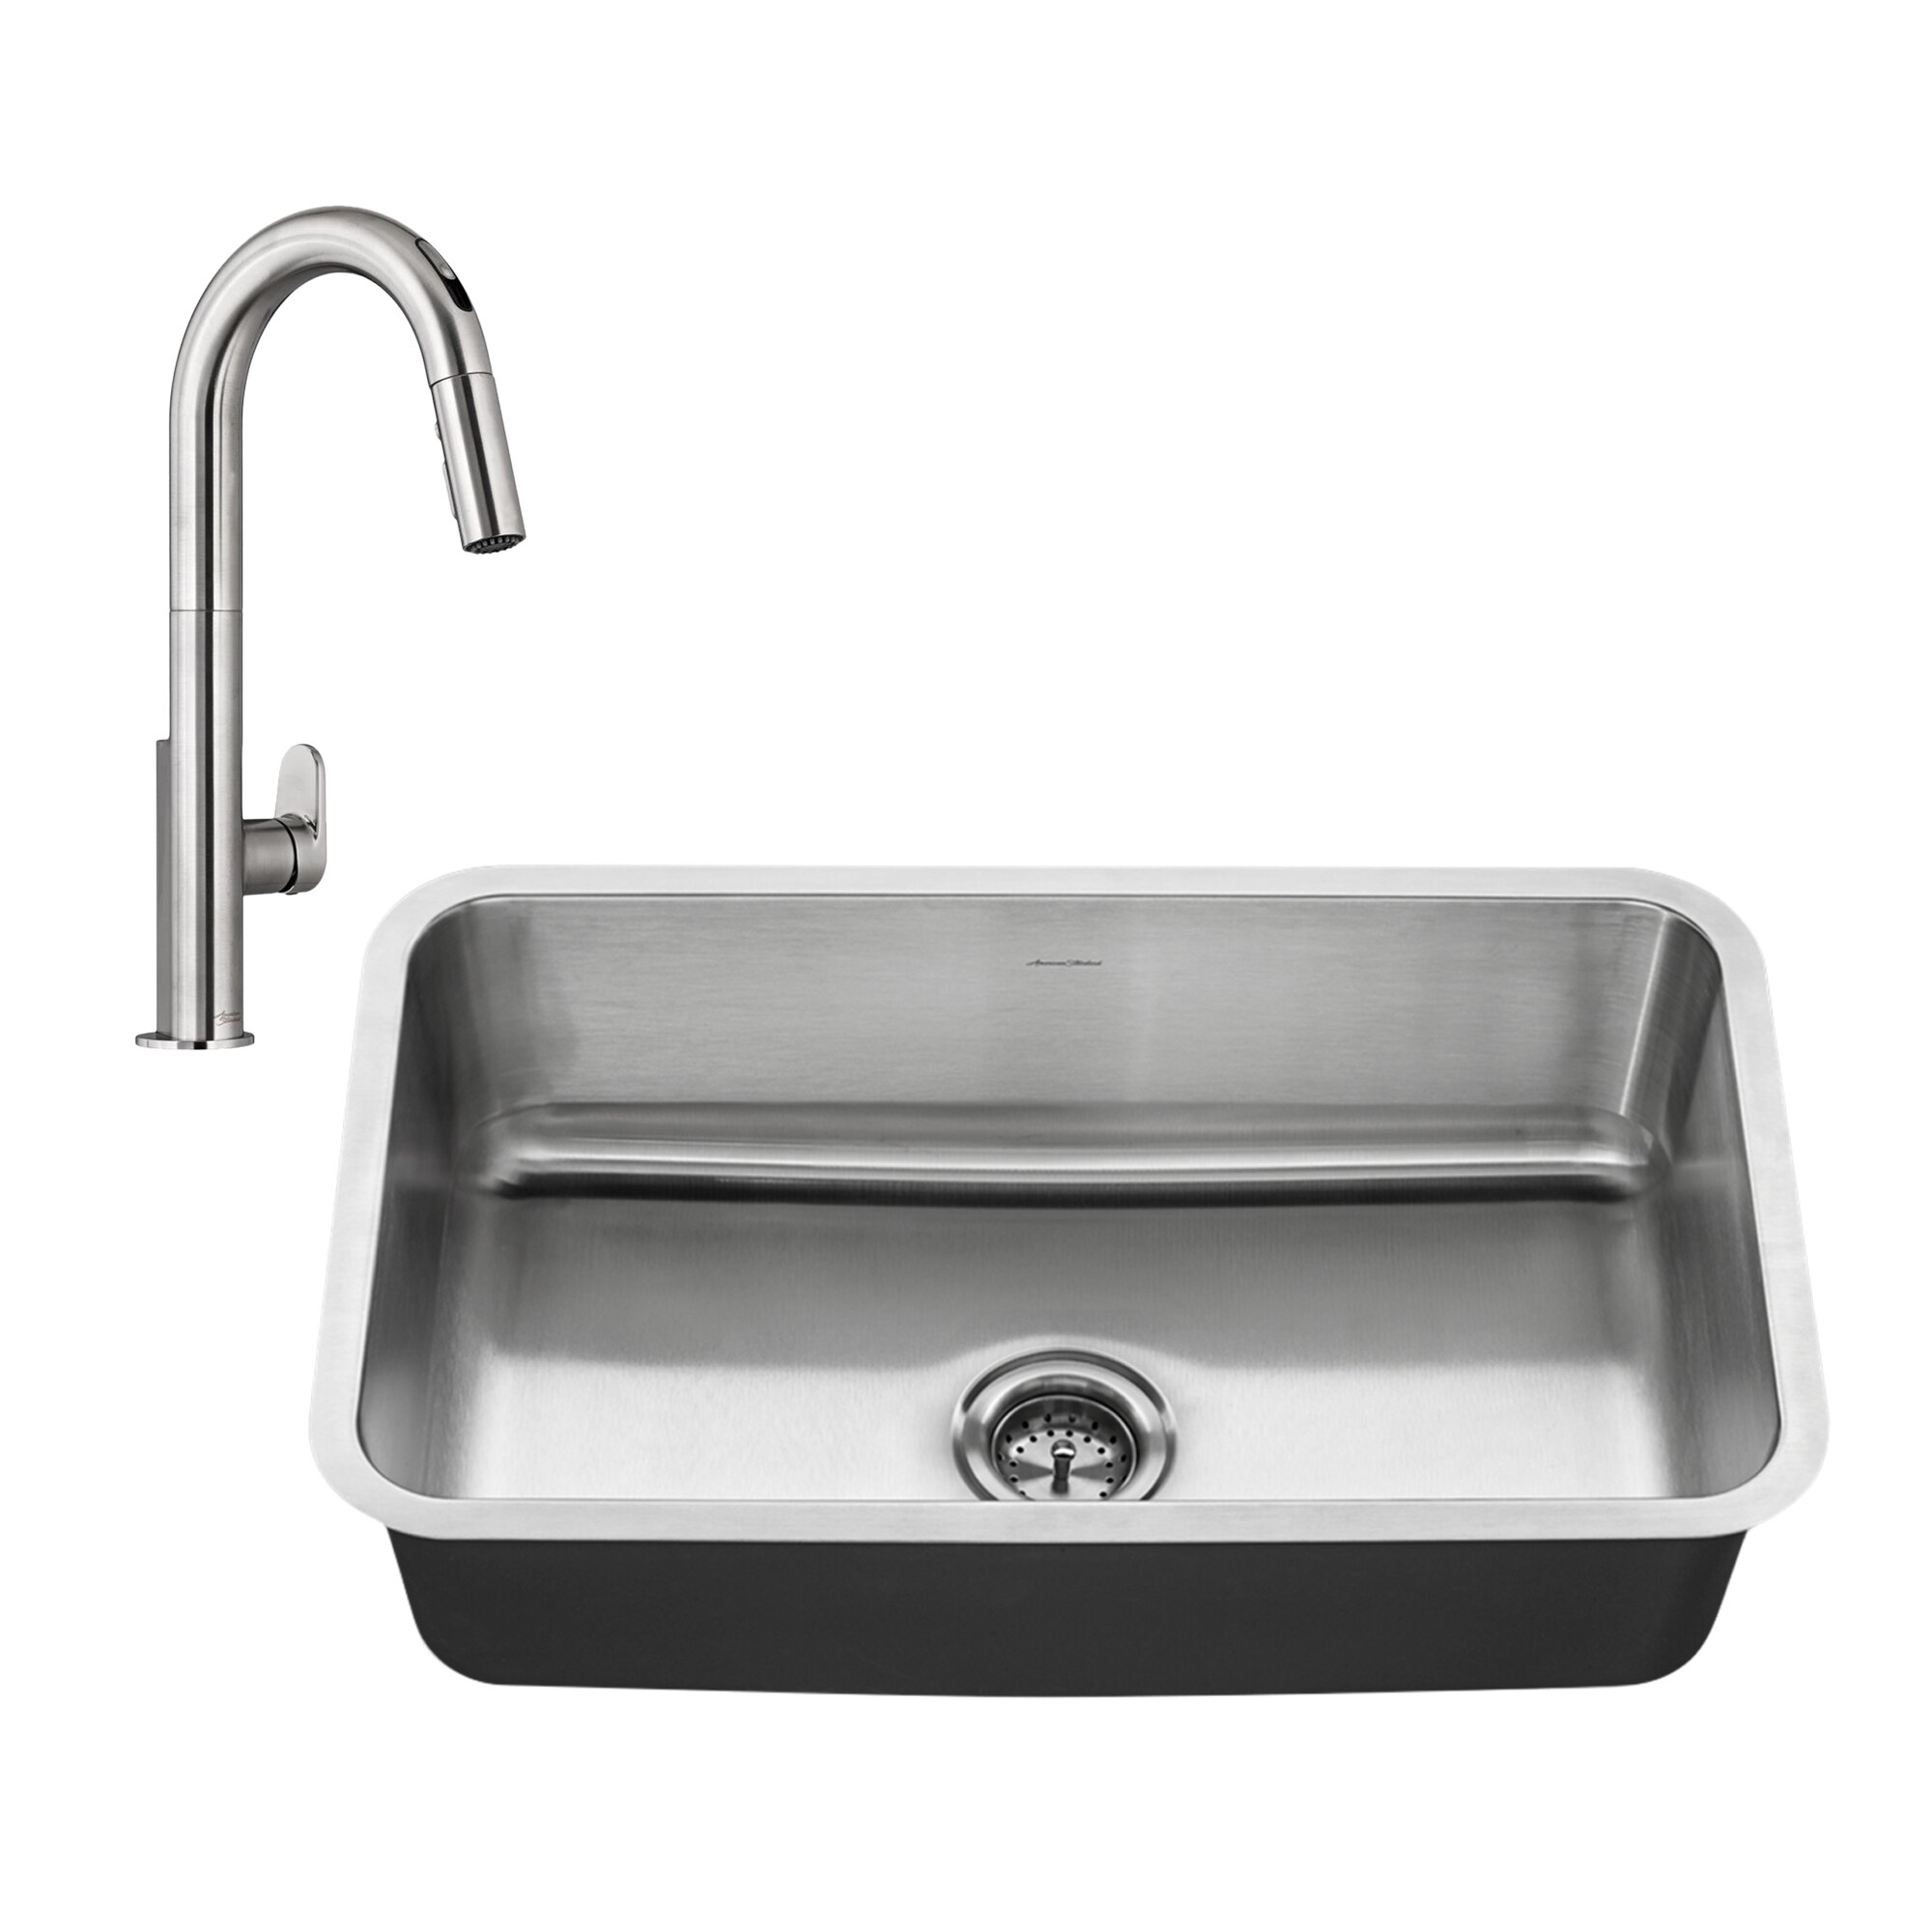 American Standard 30x18 Stainless Steel Kitchen Sink Silver for sale online 